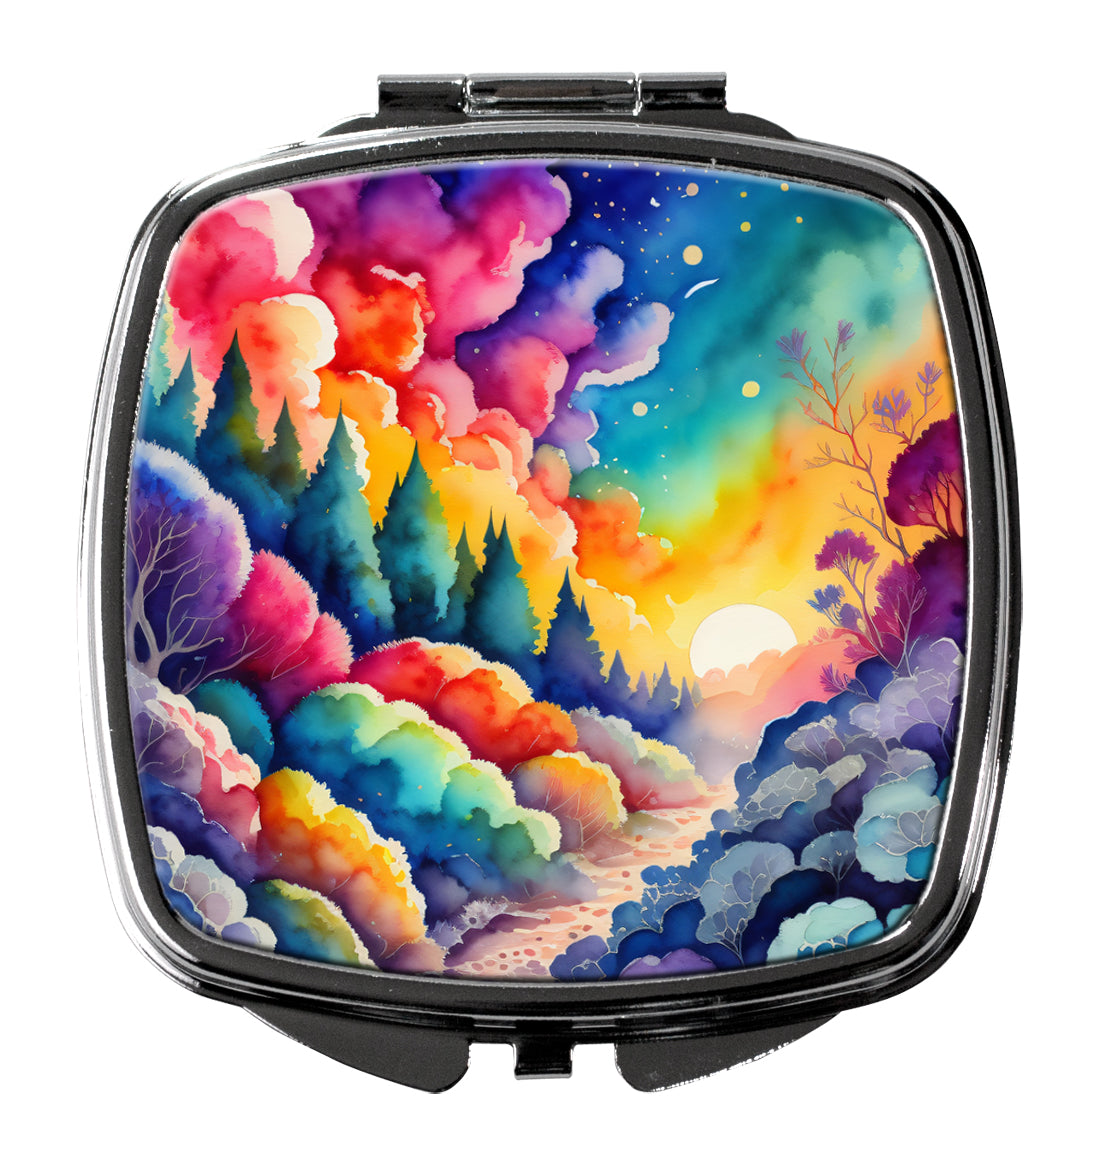 Buy this Colorful Dusty Miller Compact Mirror